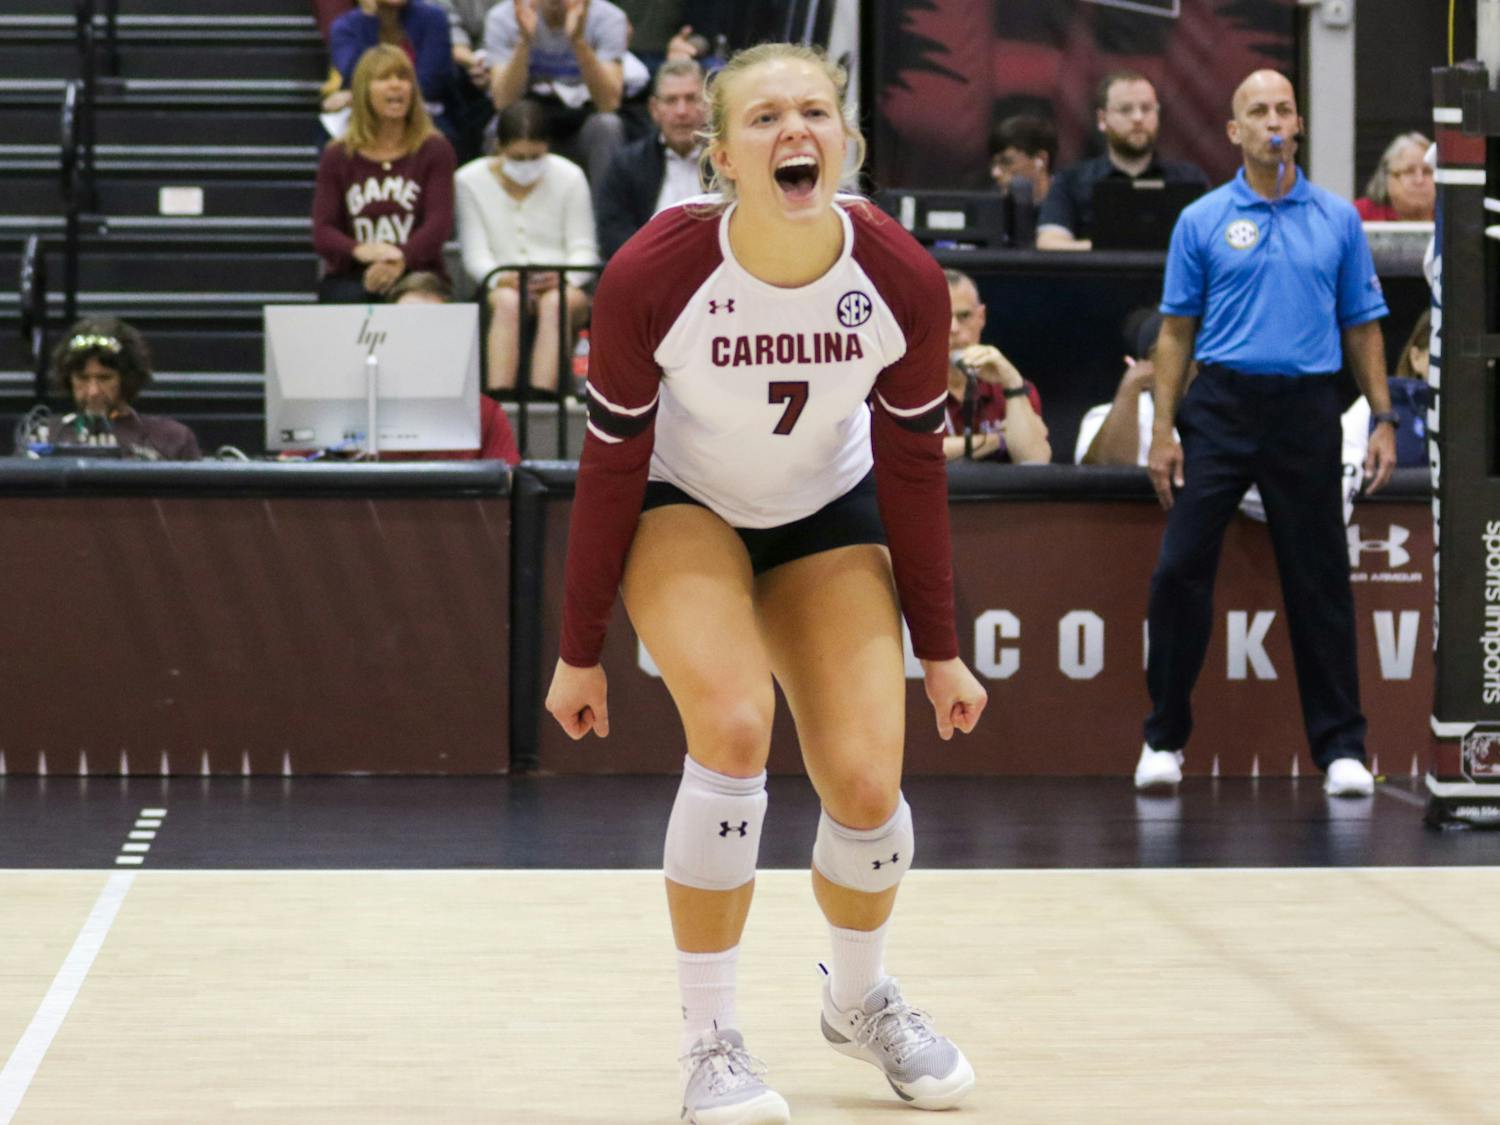 Senior outside McKenzie Moorman celebrates a point at South Carolina’s game against Mizzou on Oct. 1, 2022. Strong defensive play earned the South Carolina volleyball team two victories over conference opponent Missouri this weekend. &nbsp;&nbsp;